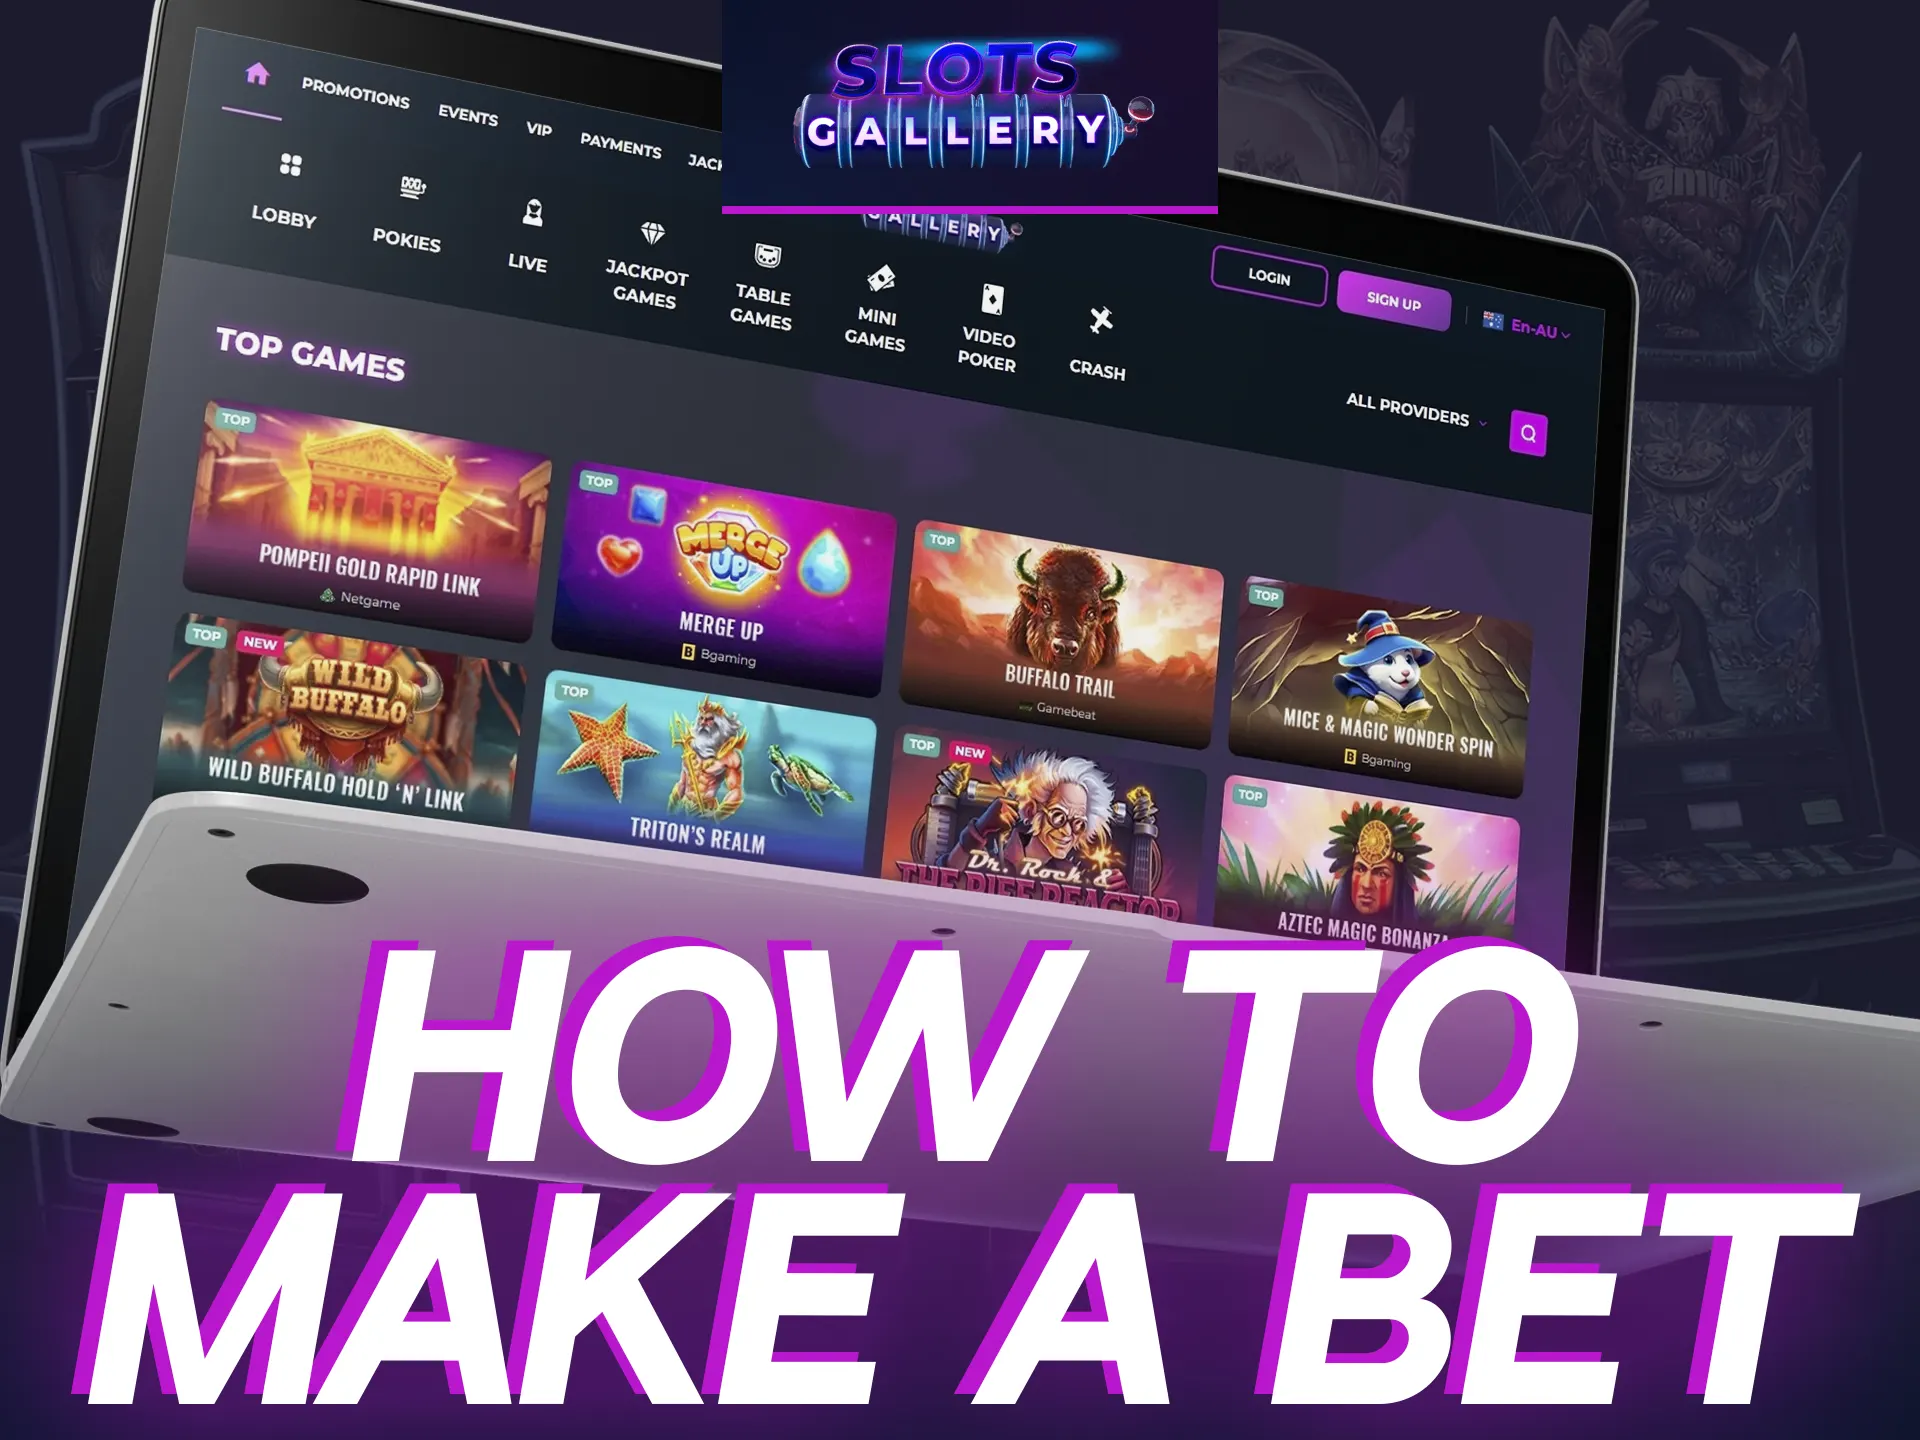 Learn how to make a bet at Slots Gallery.